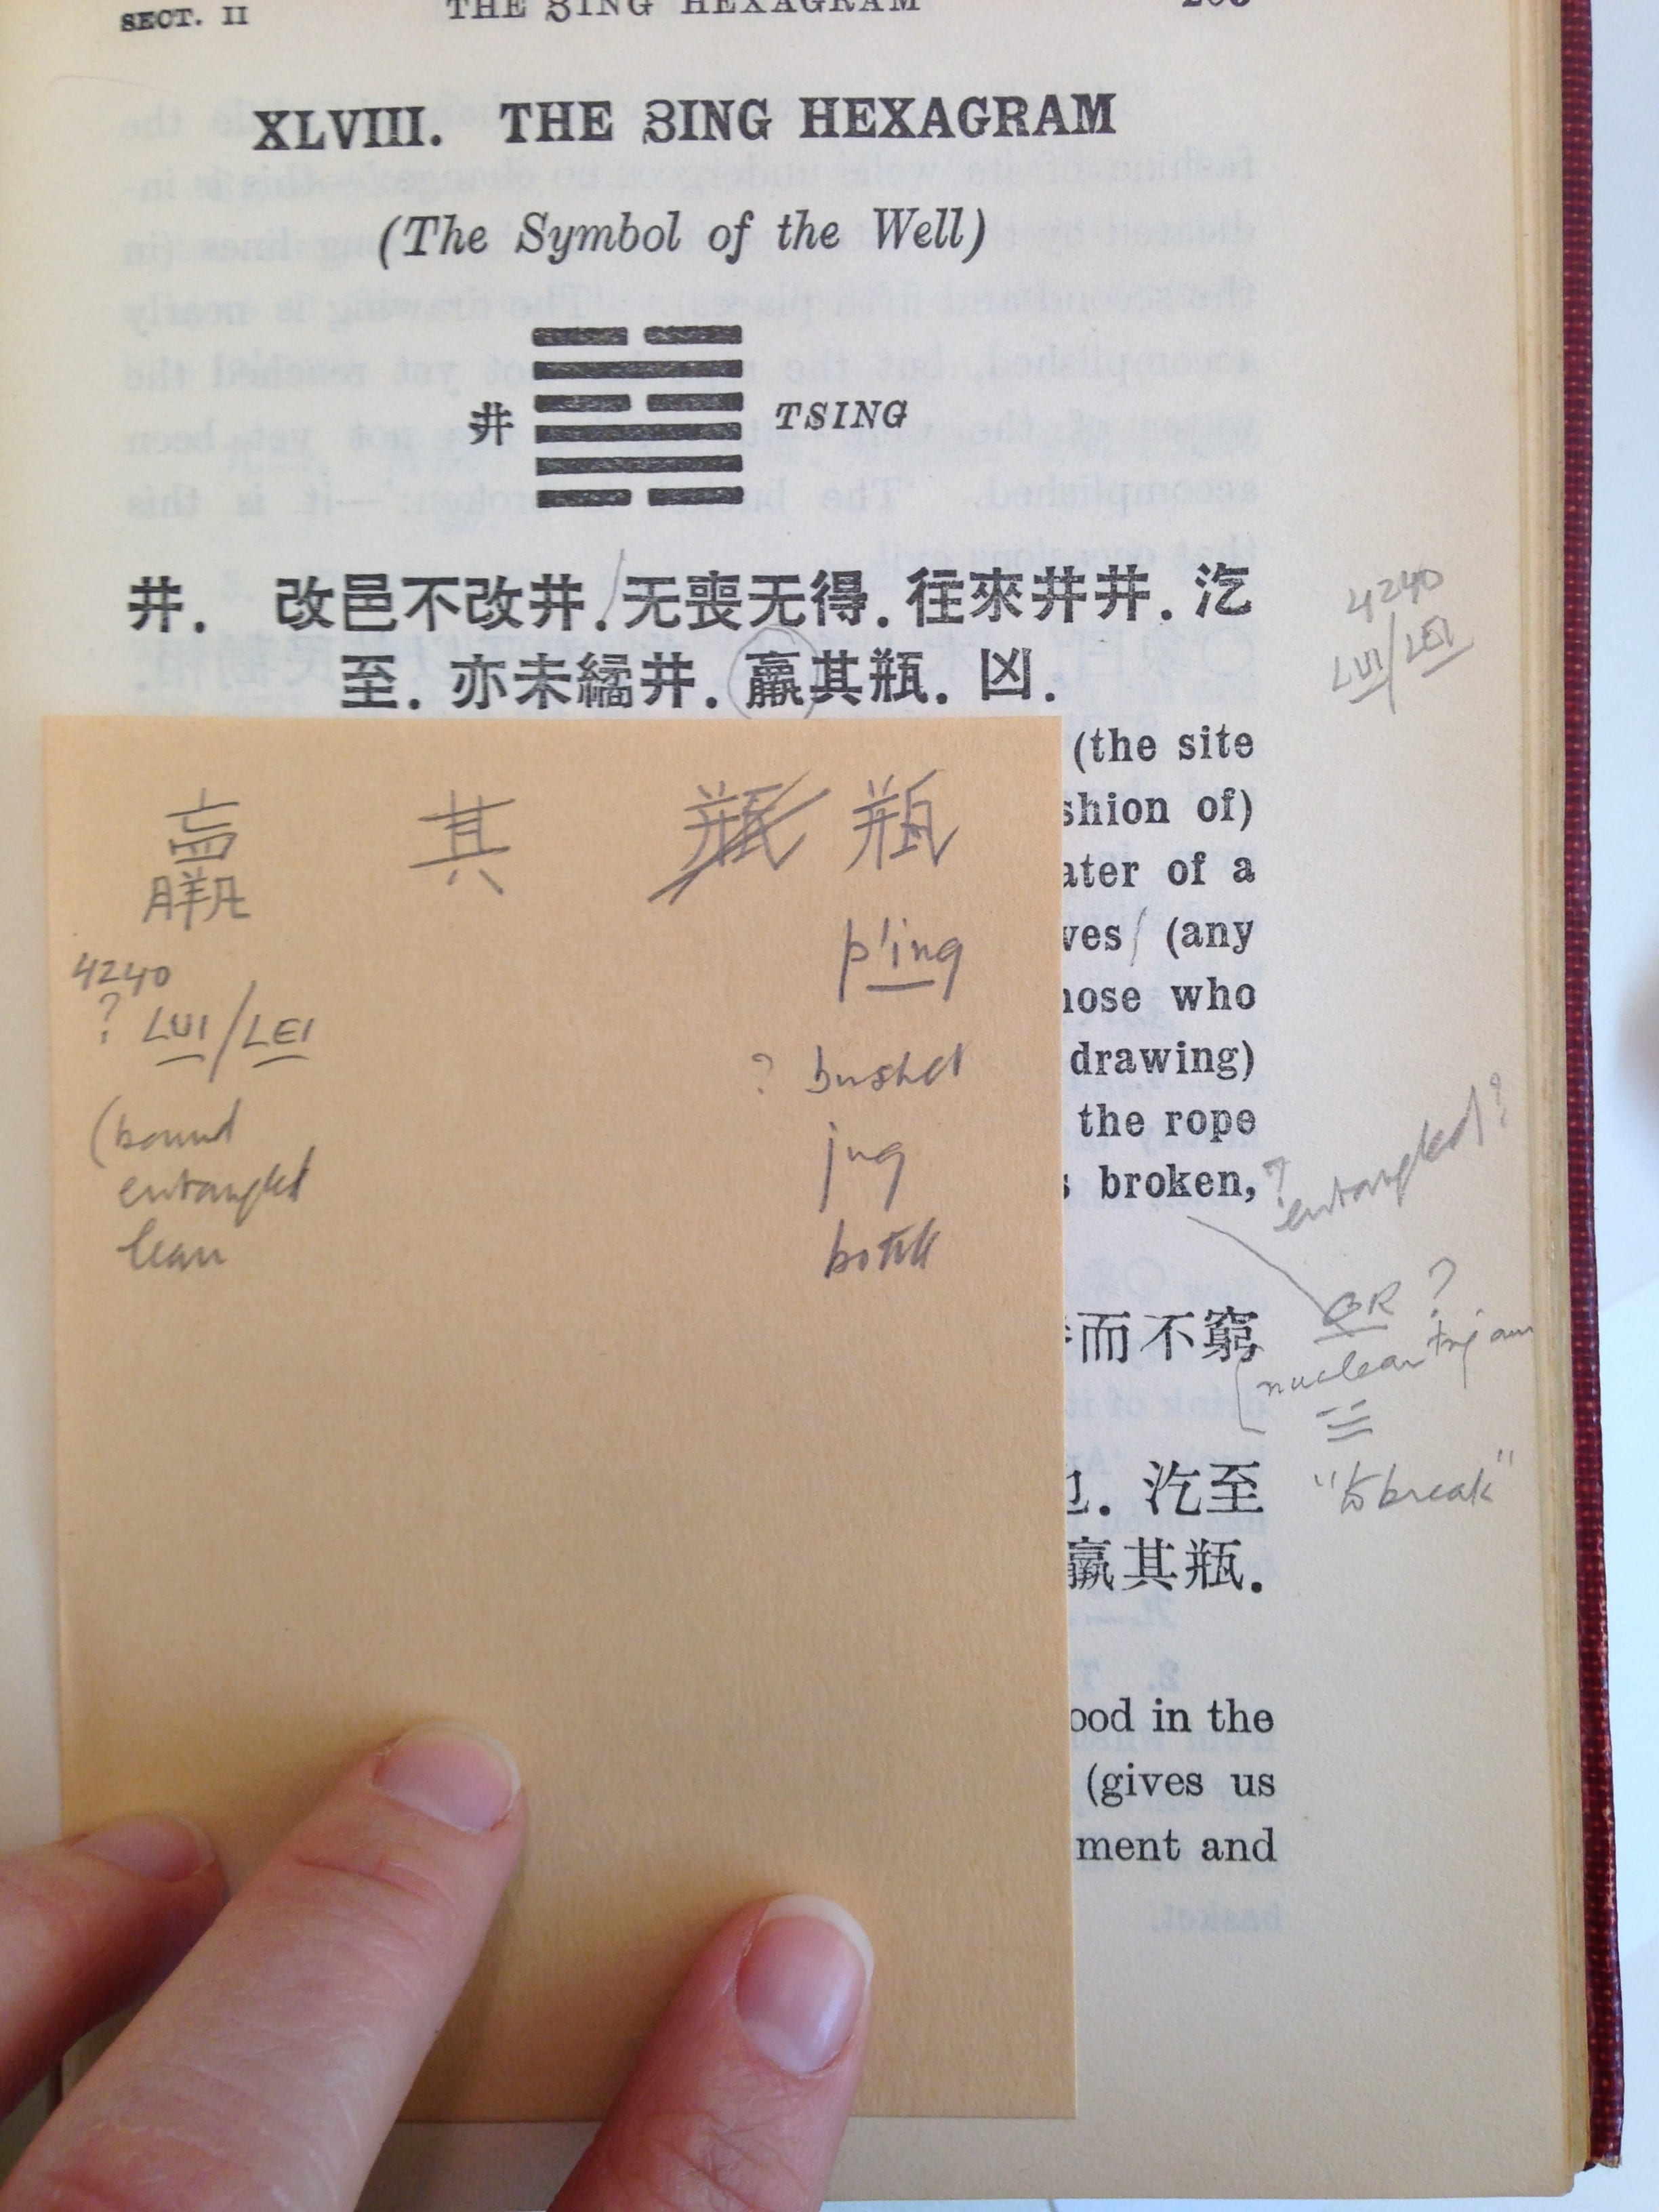 Annotations and inserts in Mai-mai Sze’s copy of the Z.D. Sung translation of the I Ching. New York Society Library, Sharaff/Sze Collection.